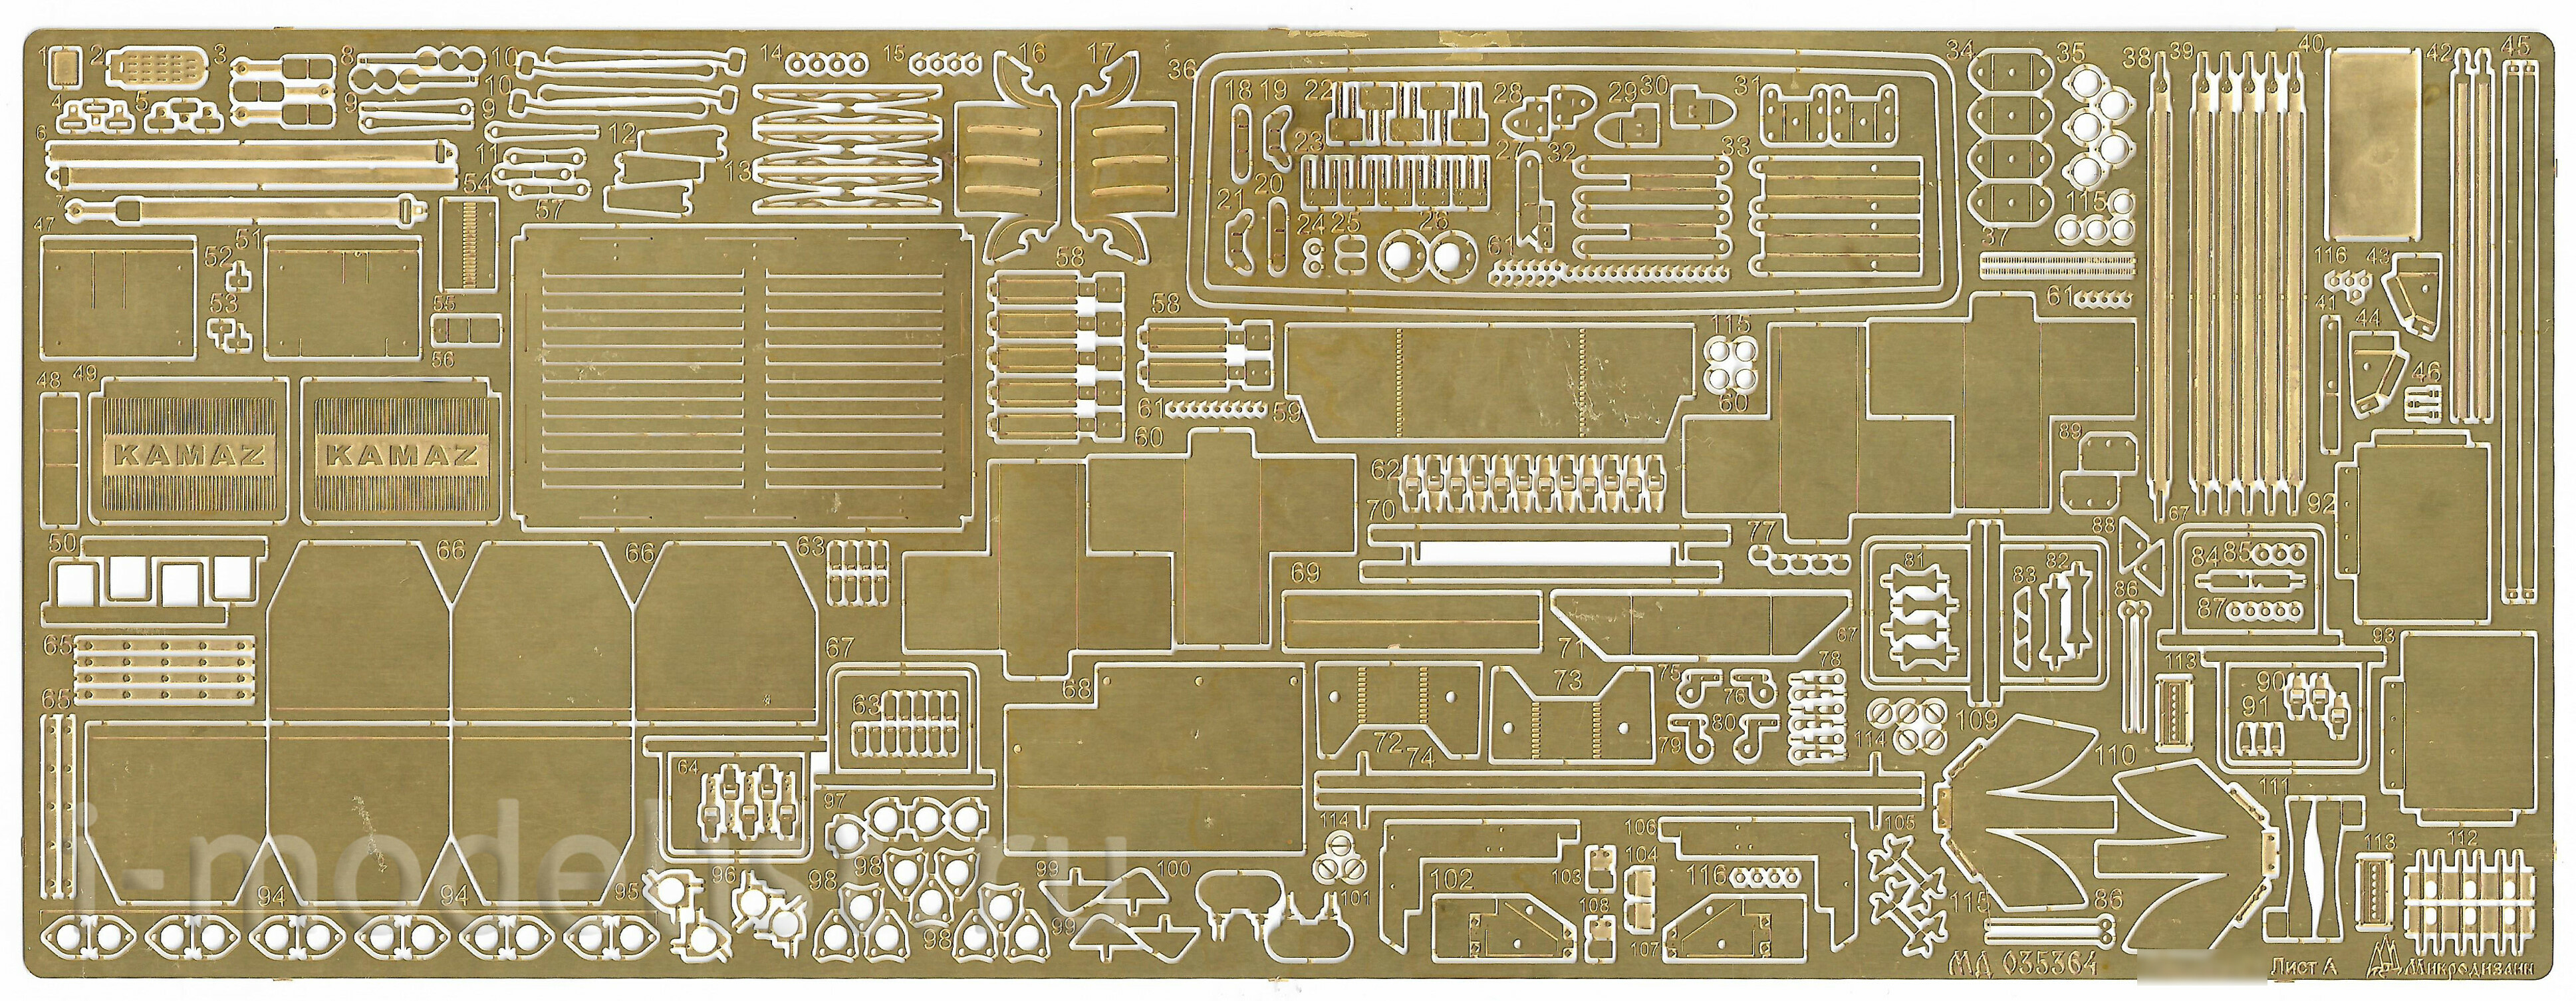 035364 Microdesign 1/35 Kit of photo-etched parts for zrpk (basic set) from the Zvezda